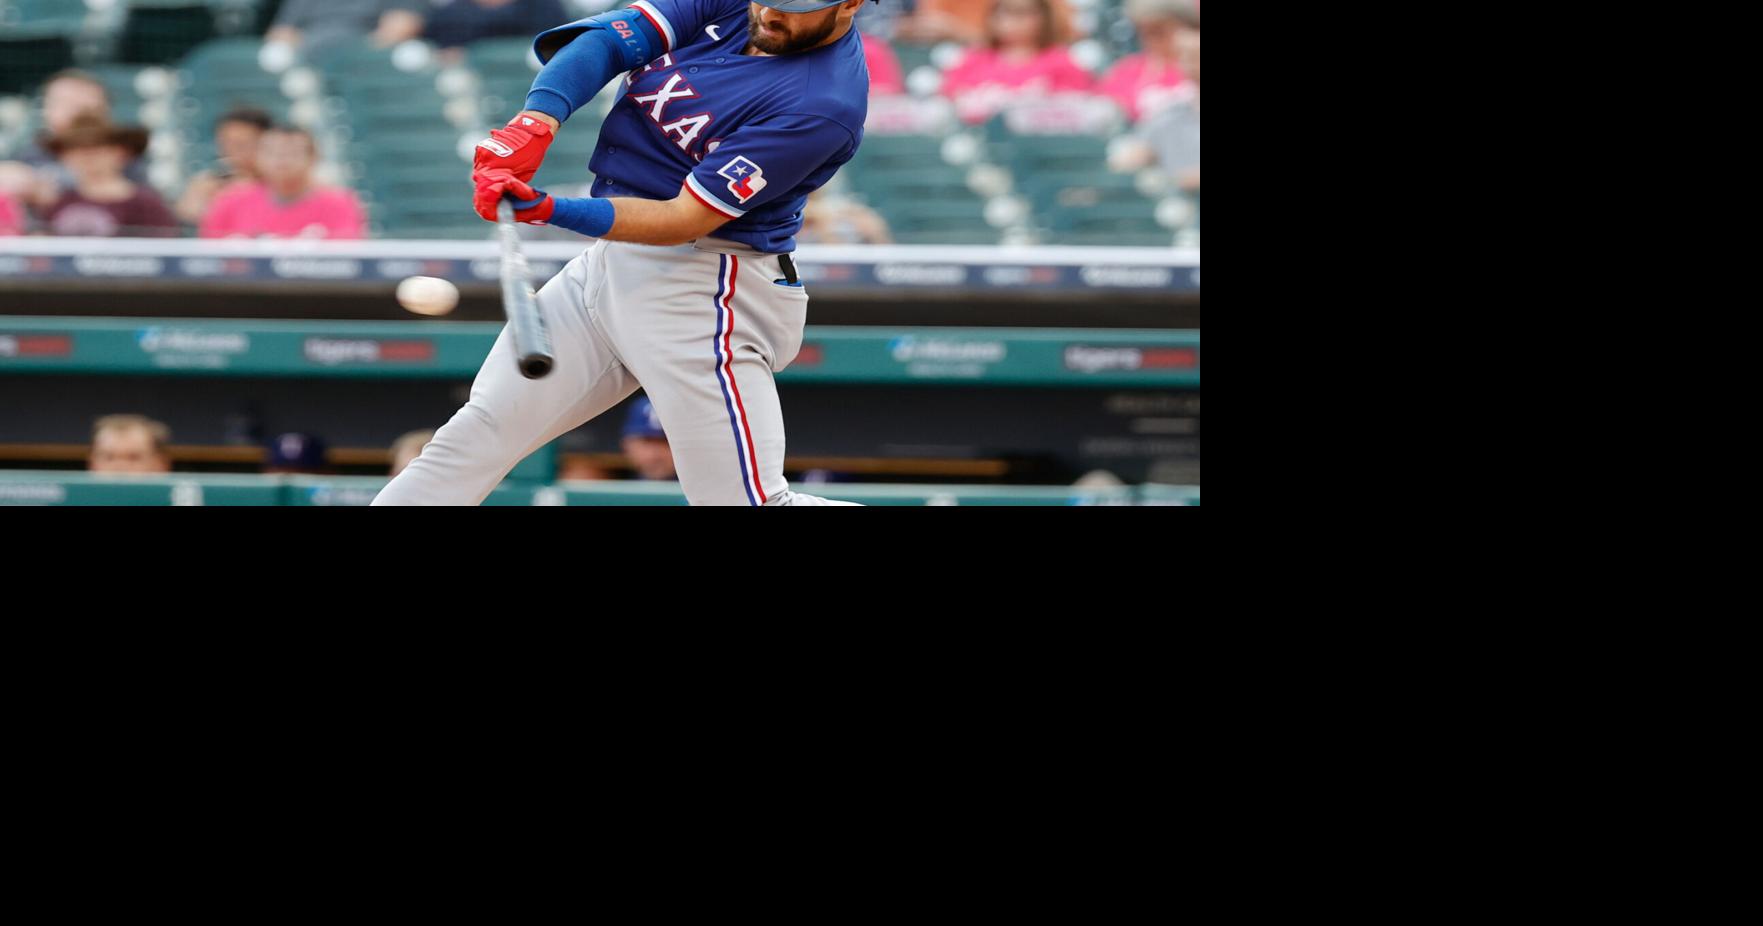 Yankees to add All-Star slugger Joey Gallo in trade with Rangers